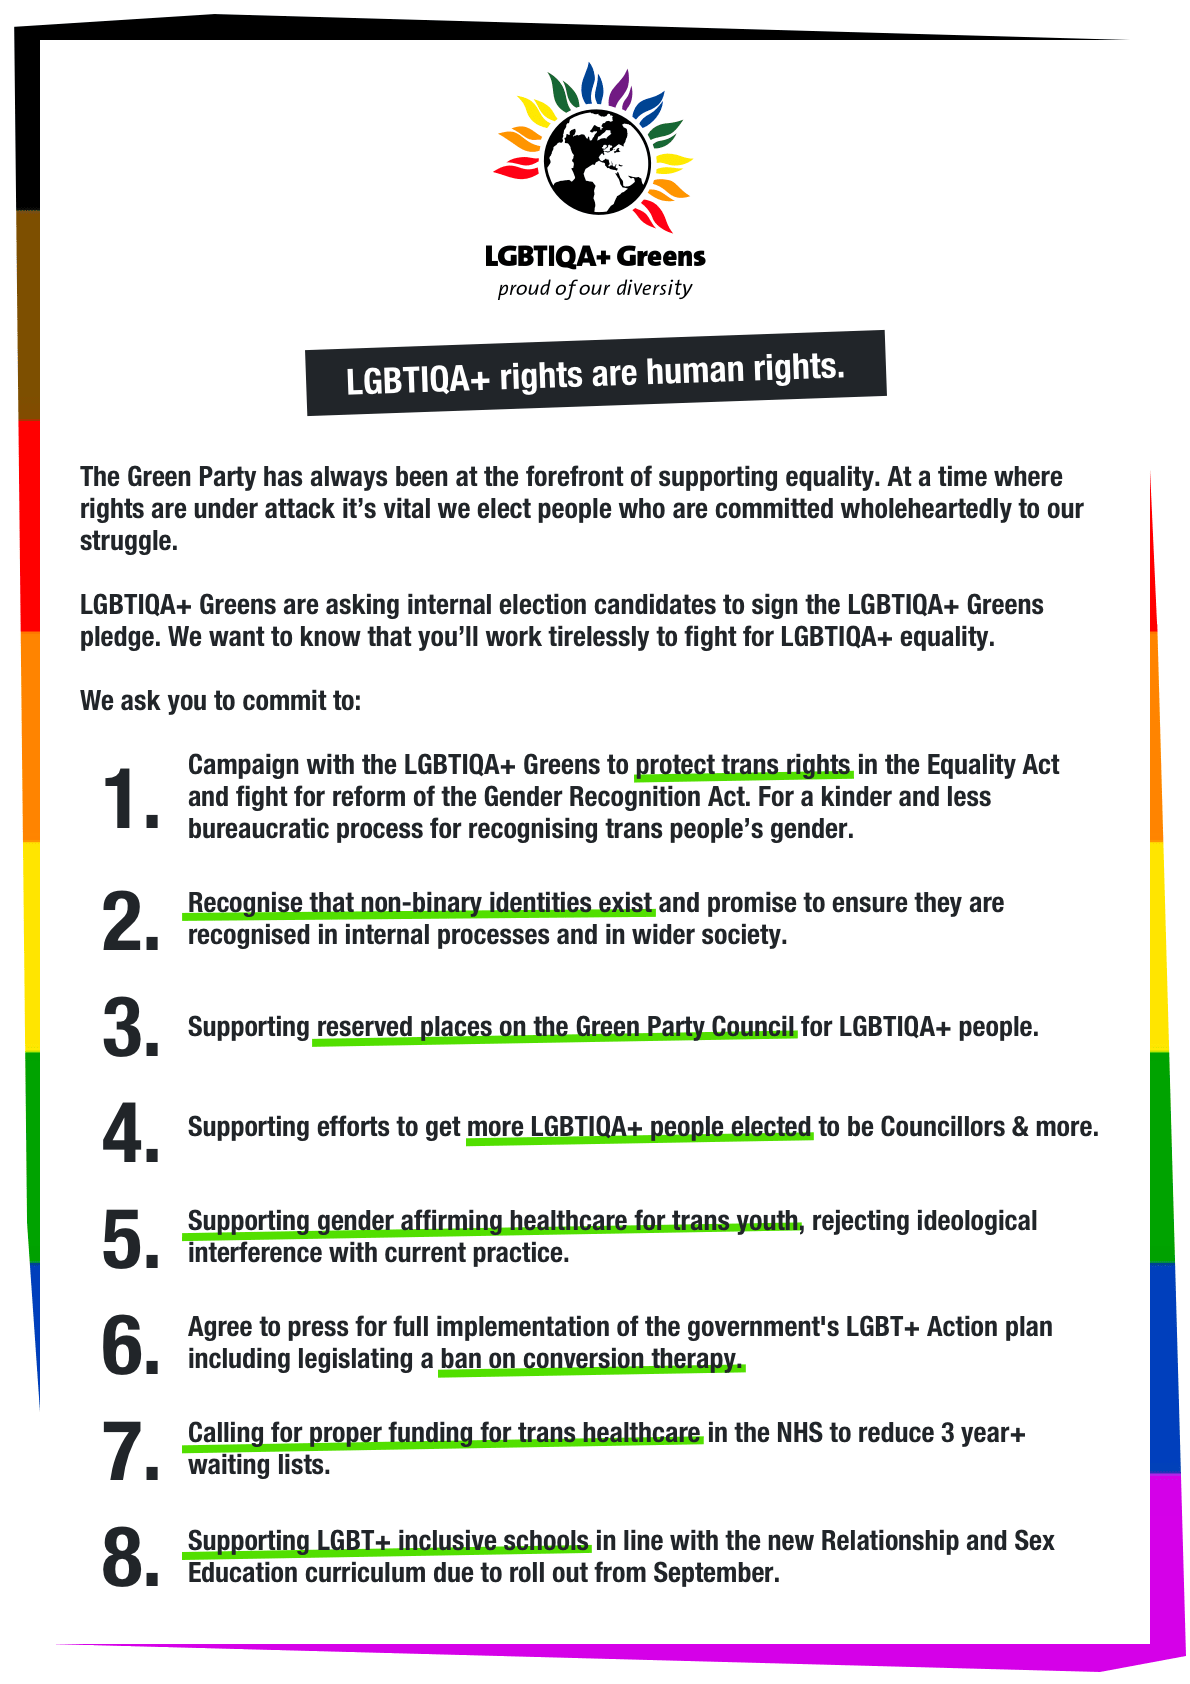 Campaigns graphic: Details of the 8 pledges that LGBTIQA+ Greens asked leadership candidates to sign up to.